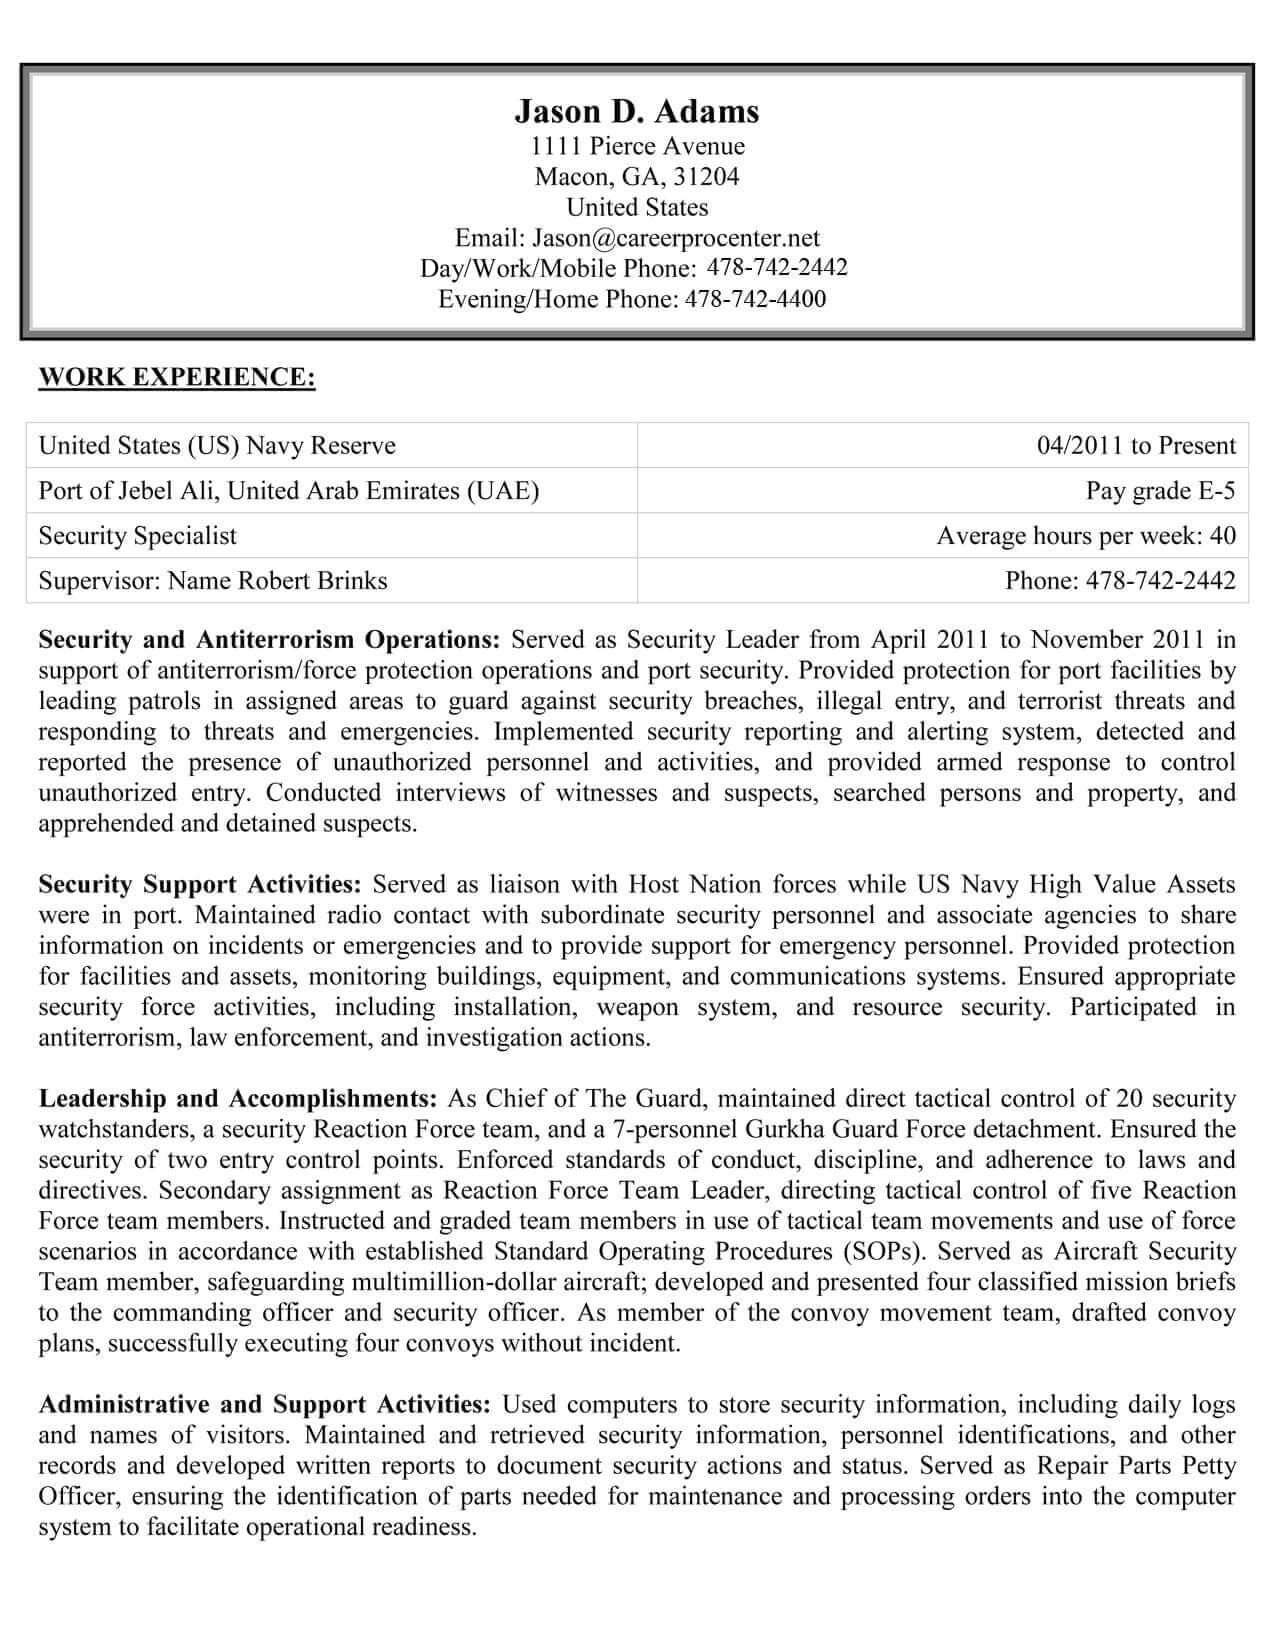 personnel security specialist resume sample